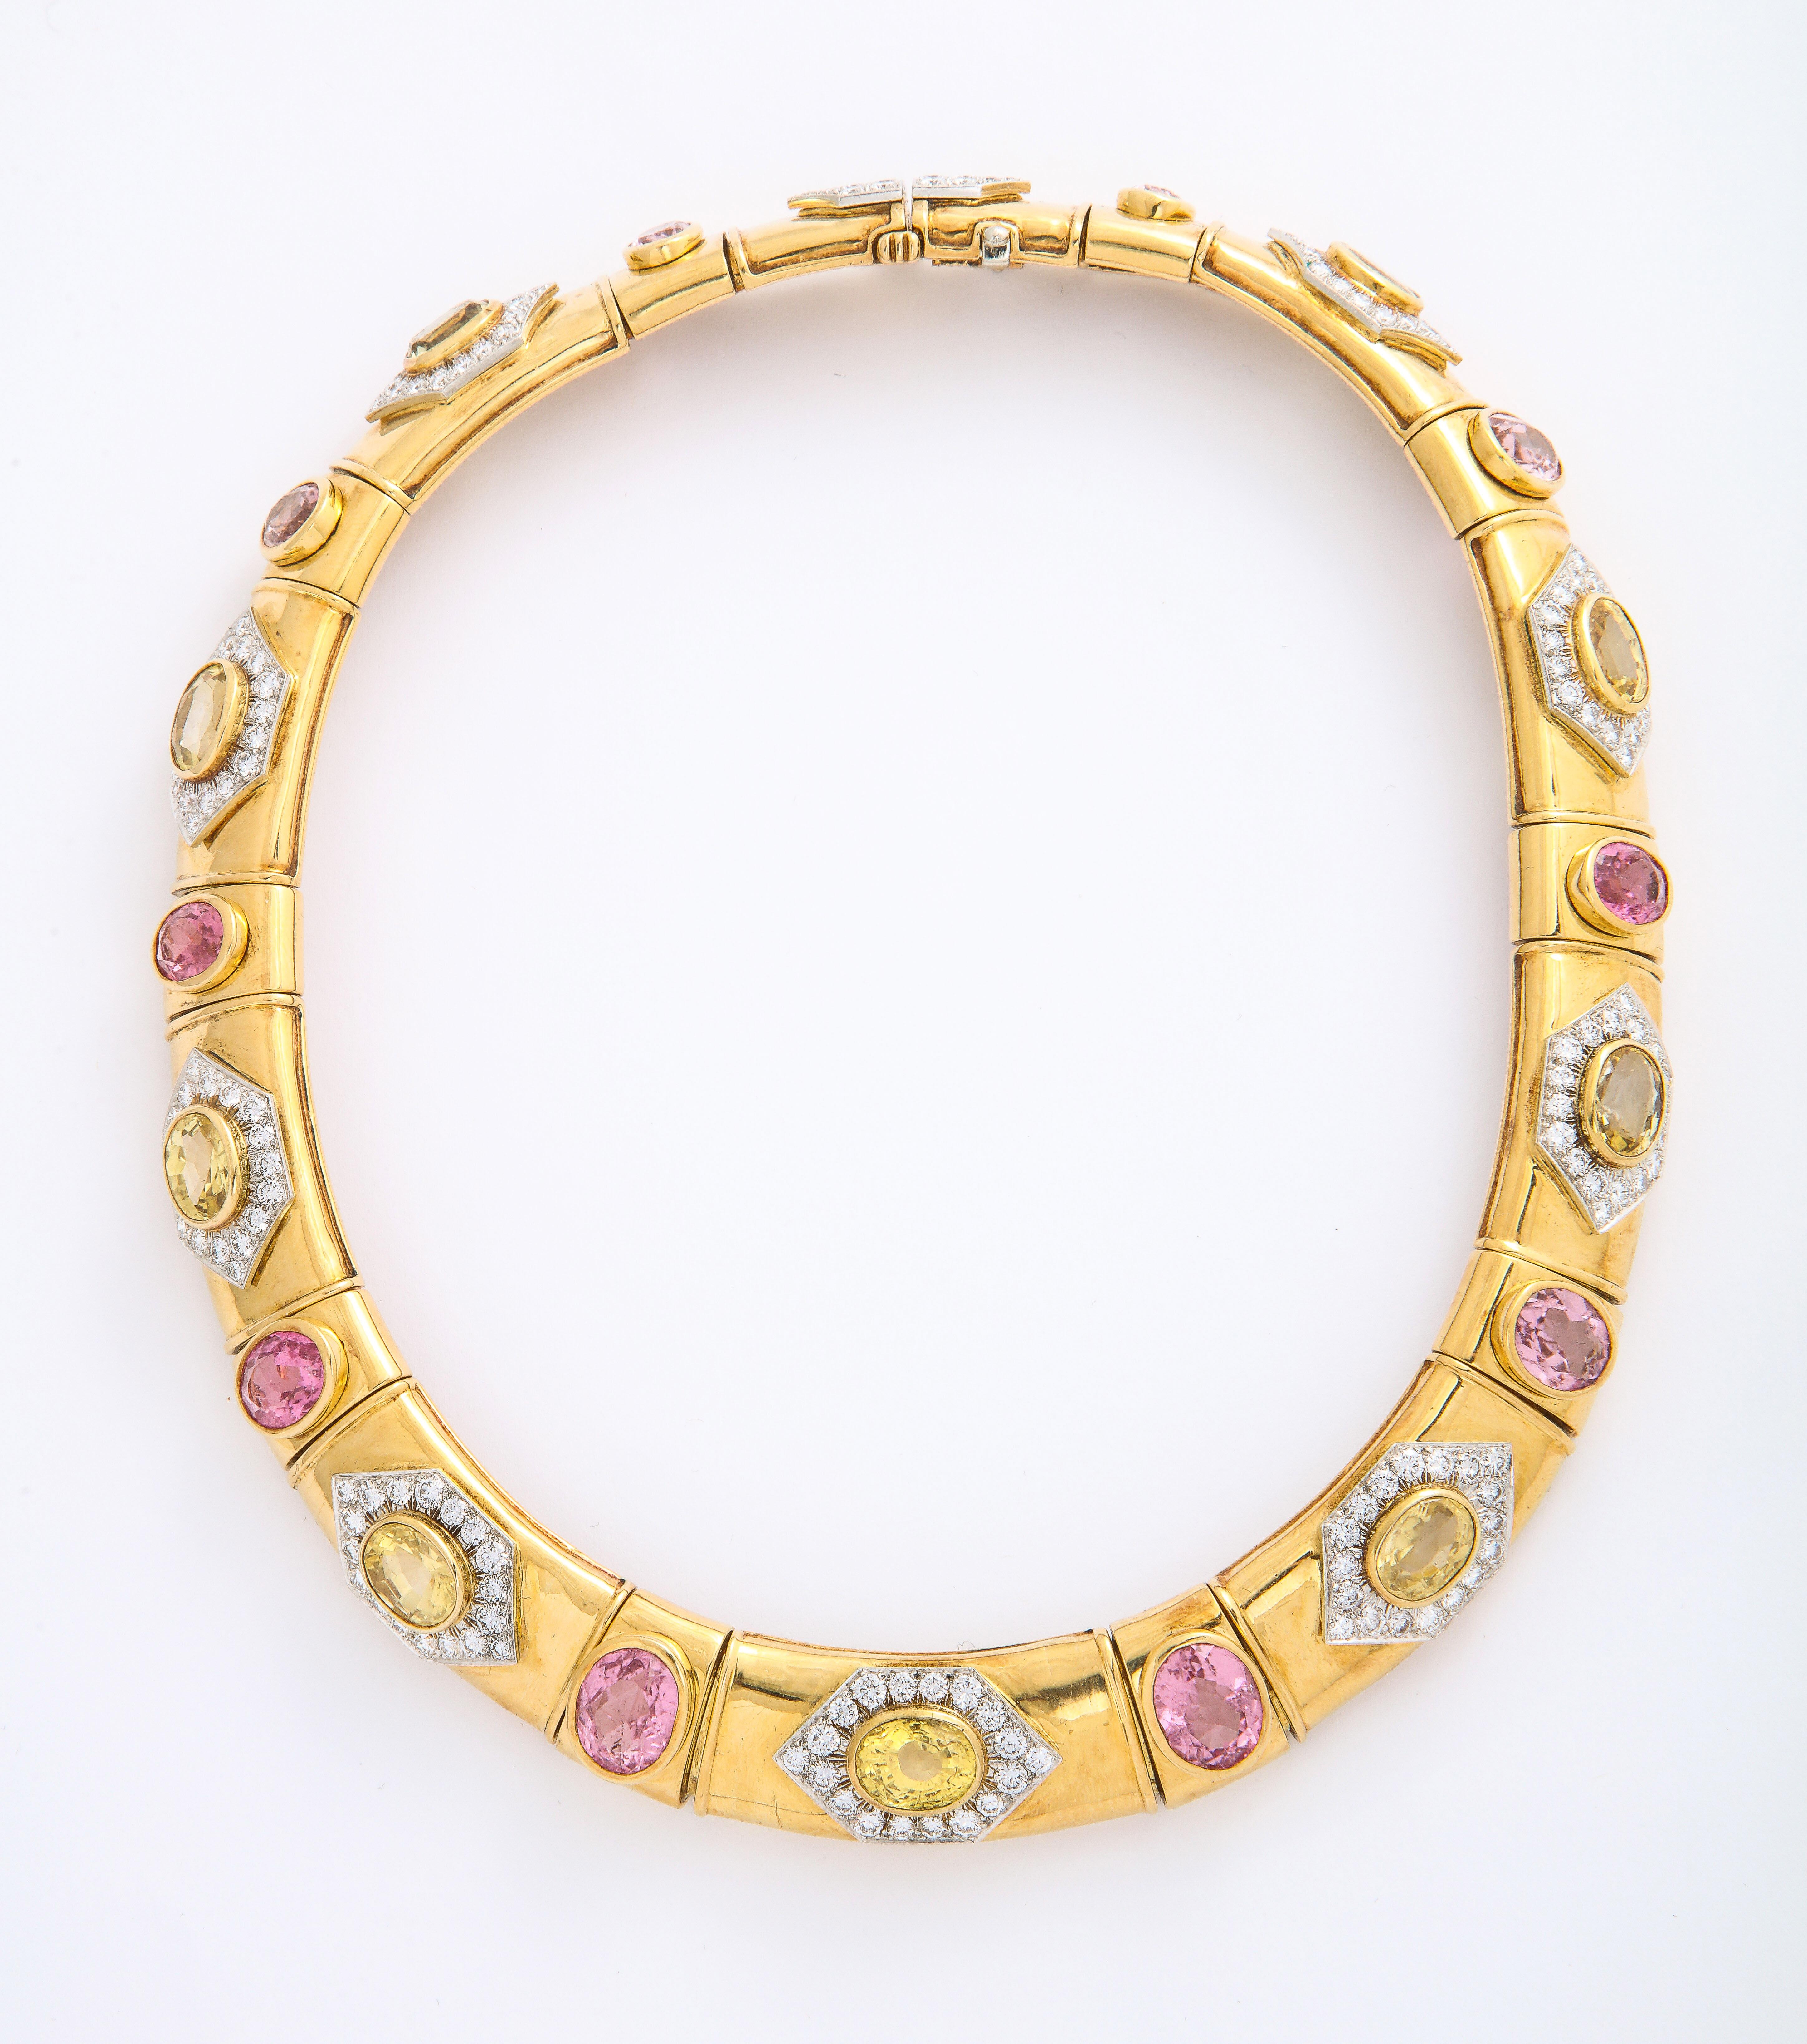 Created circa 1980, this magnificent Collar and Earrings set by David Webb is made in 18K Yellow Gold, adorned with multiple sapphires, citrines and pink tourmalines, and 20.0 cts tw of fine white full-cut diamonds. It is marked 18k PL